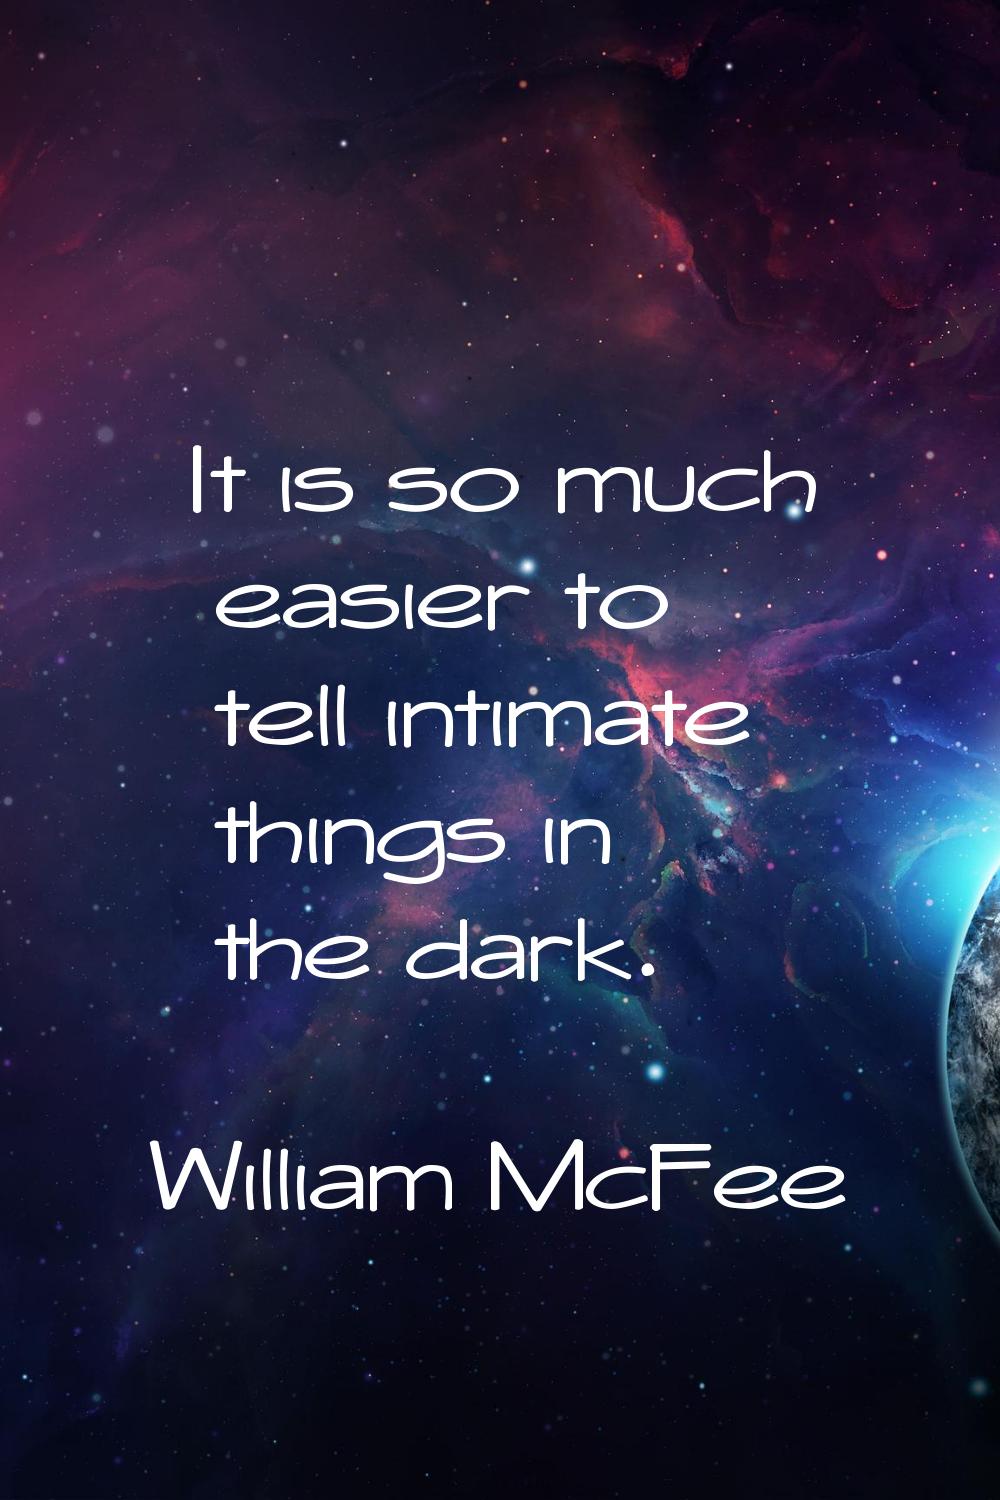 It is so much easier to tell intimate things in the dark.